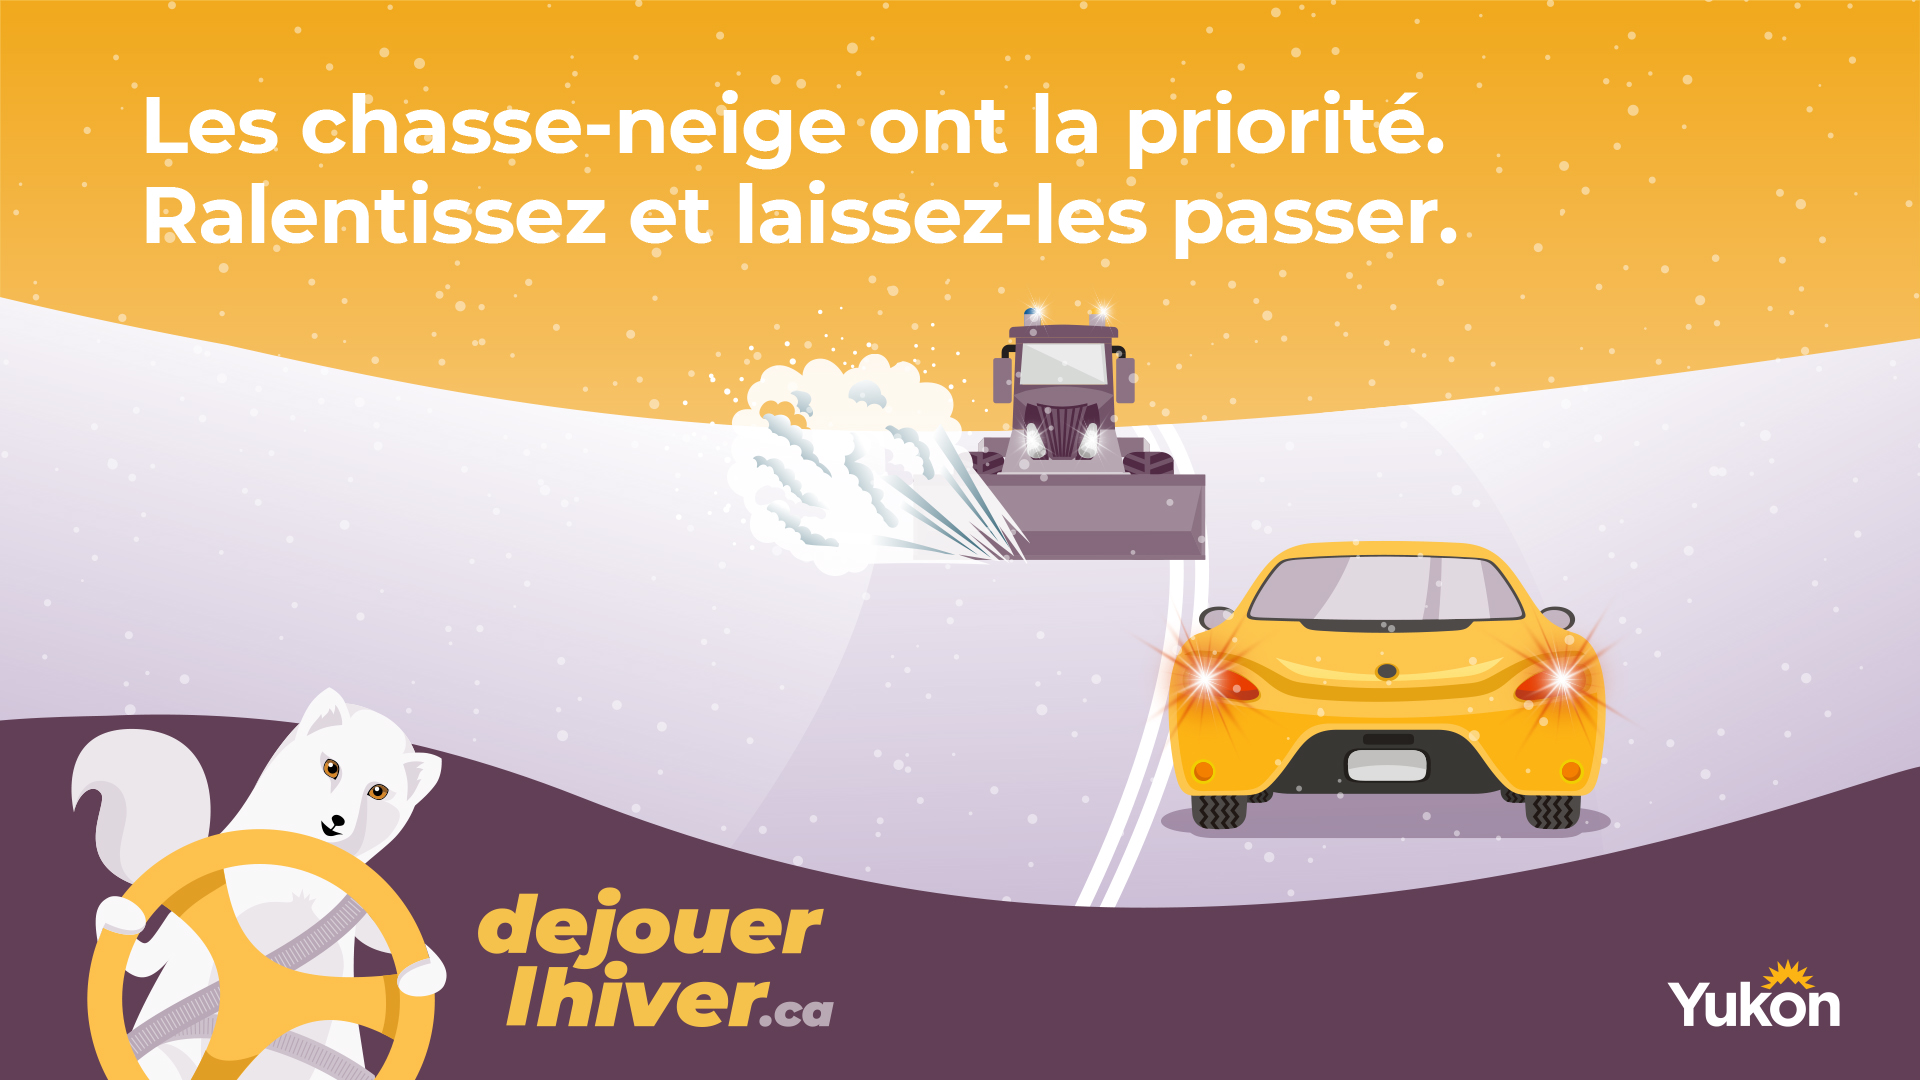 les chasse-neige sont prioritaires